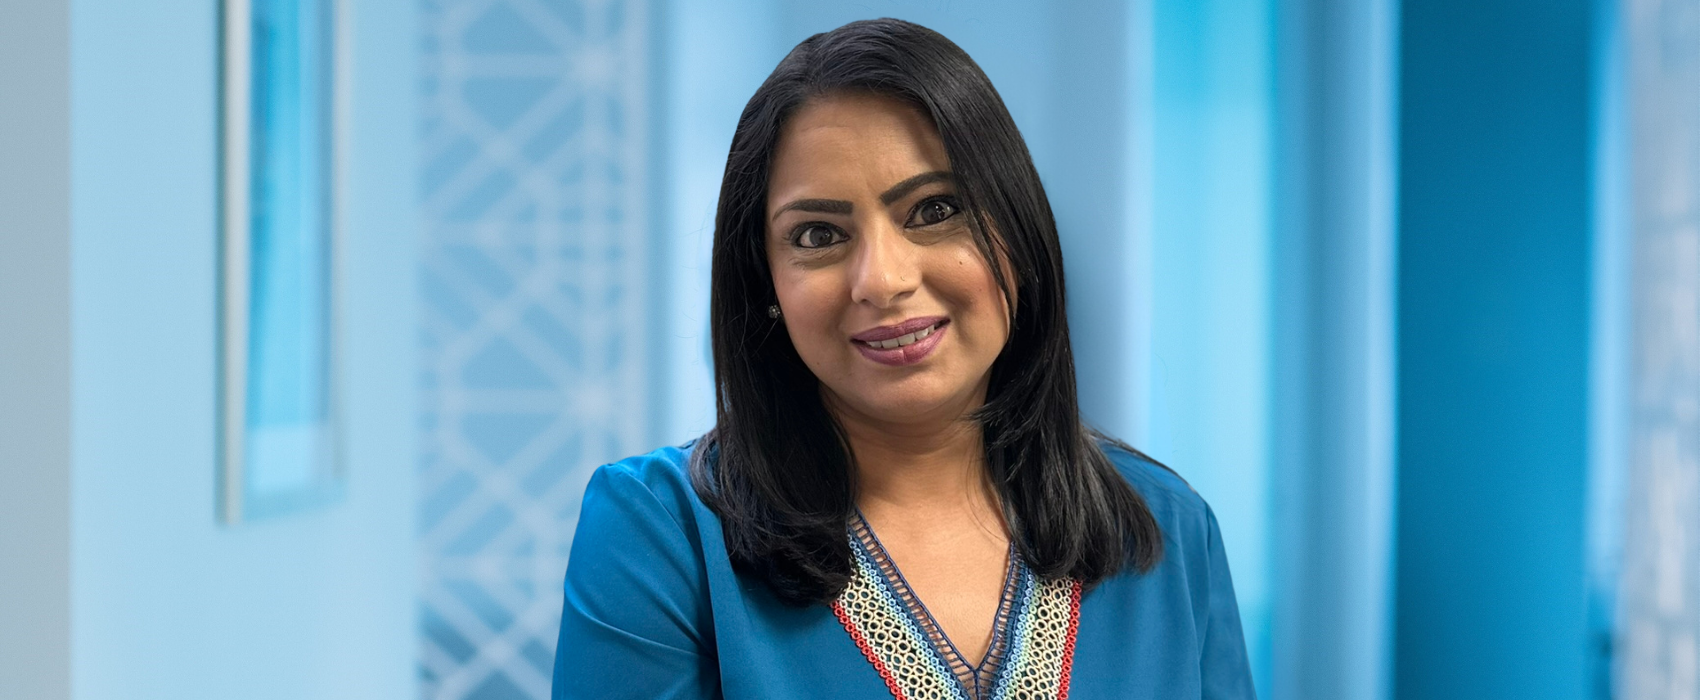 Alpa Patel, Account Manager at HCP Automotive. Recruiting across the Middle East and Asia